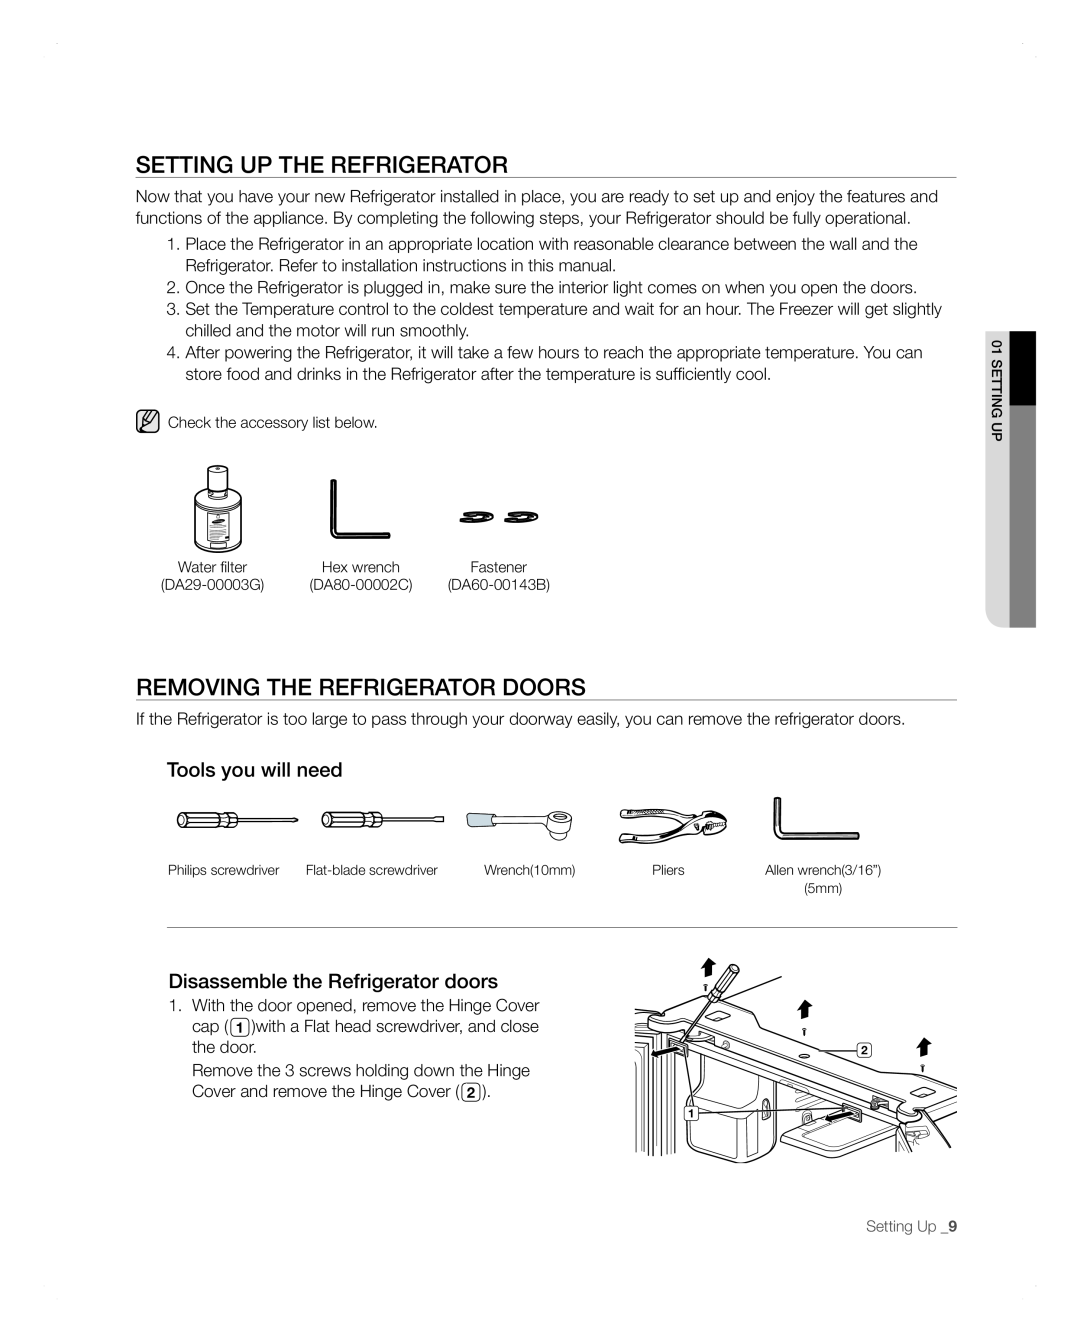 Samsung RFG297AARS user manual setting uP tHe ReFRigeRAtoR, Removing the refrigerator doors, Tools you will need 